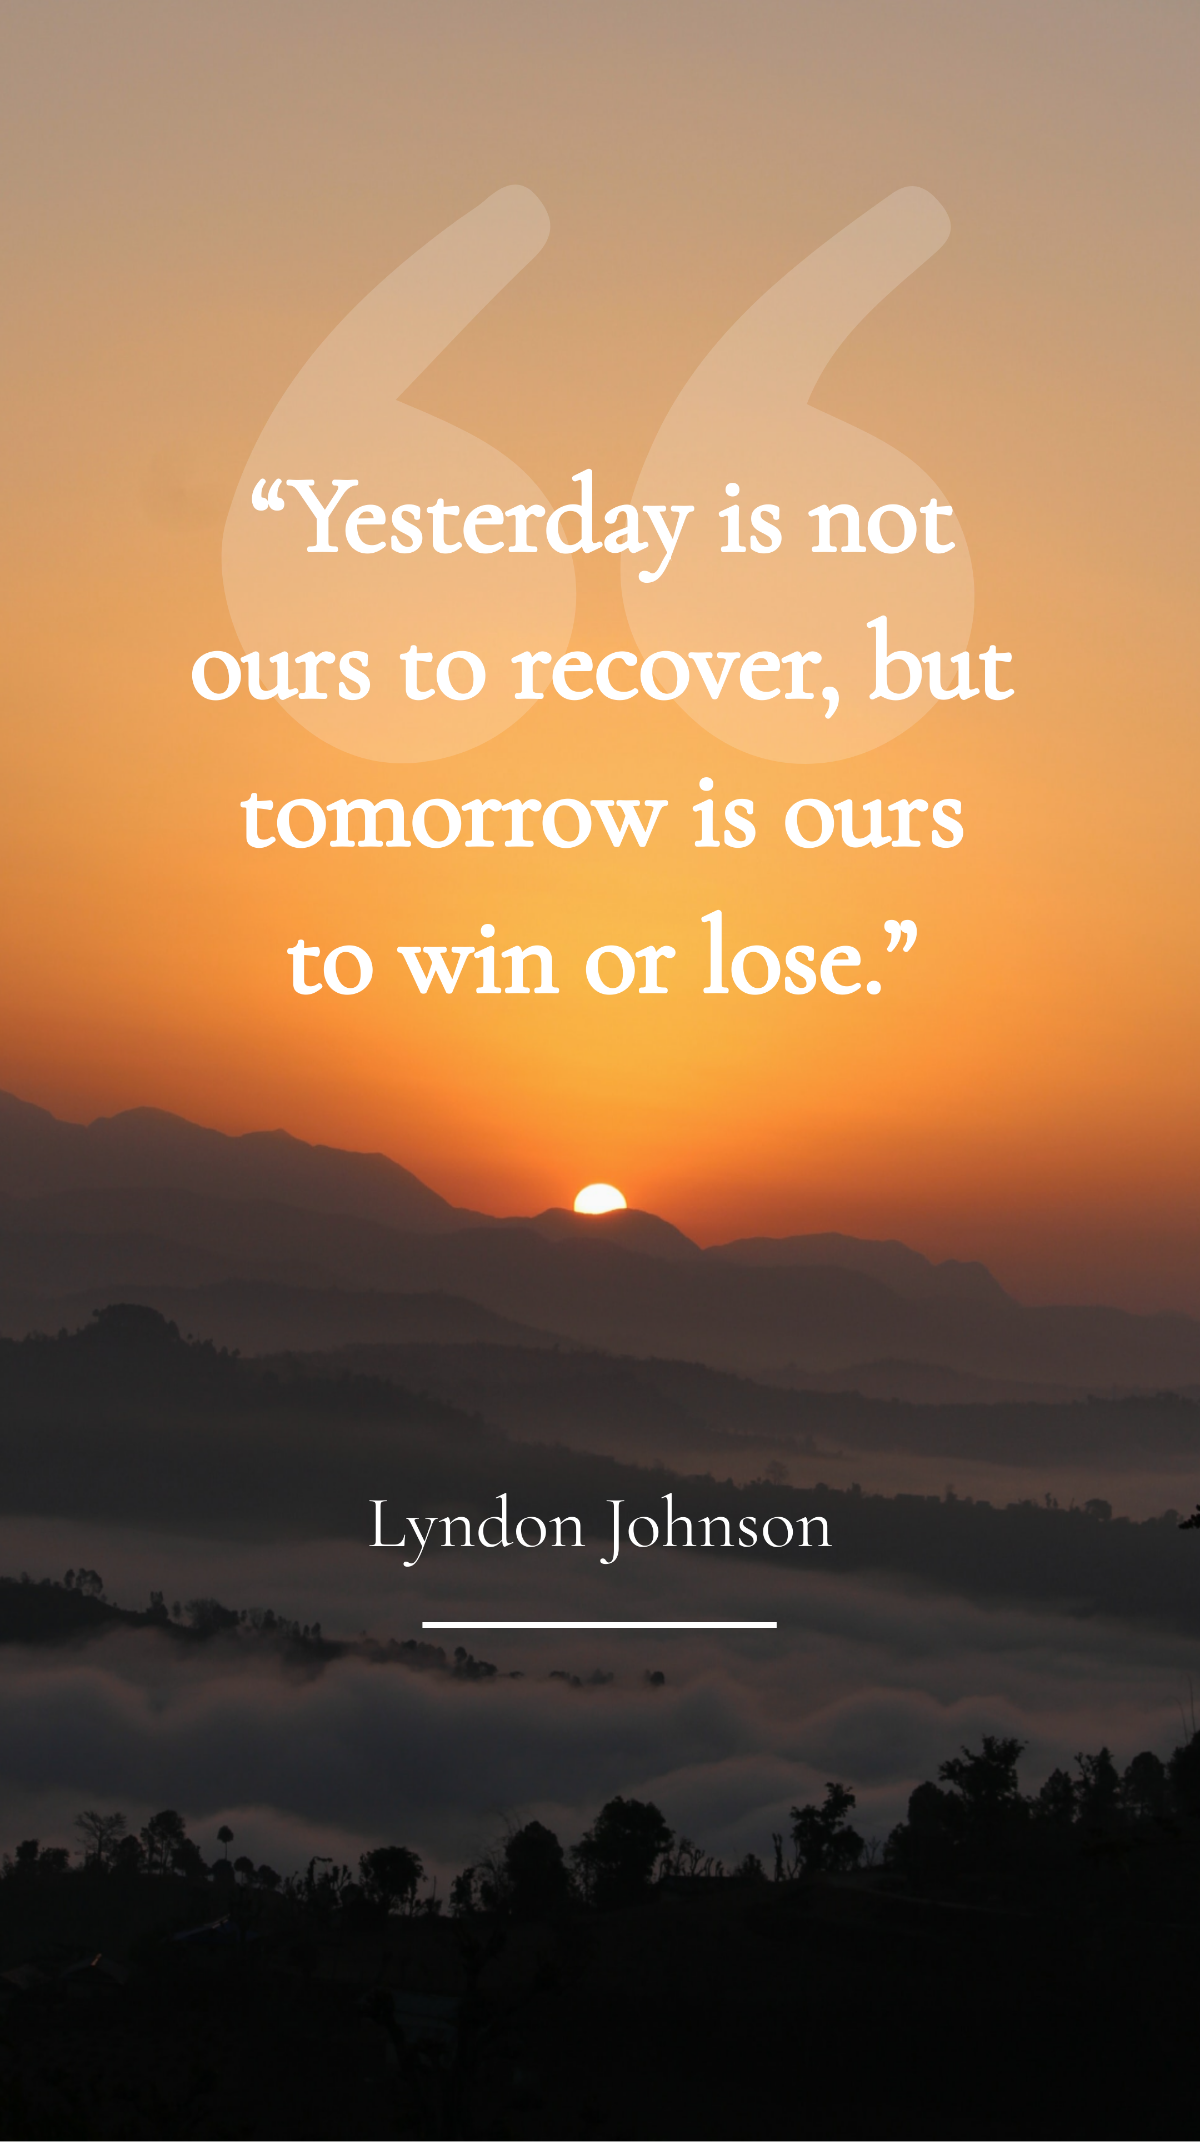 Lyndon Johnson - “Yesterday is not ours to recover, but tomorrow is ours to win or lose.”